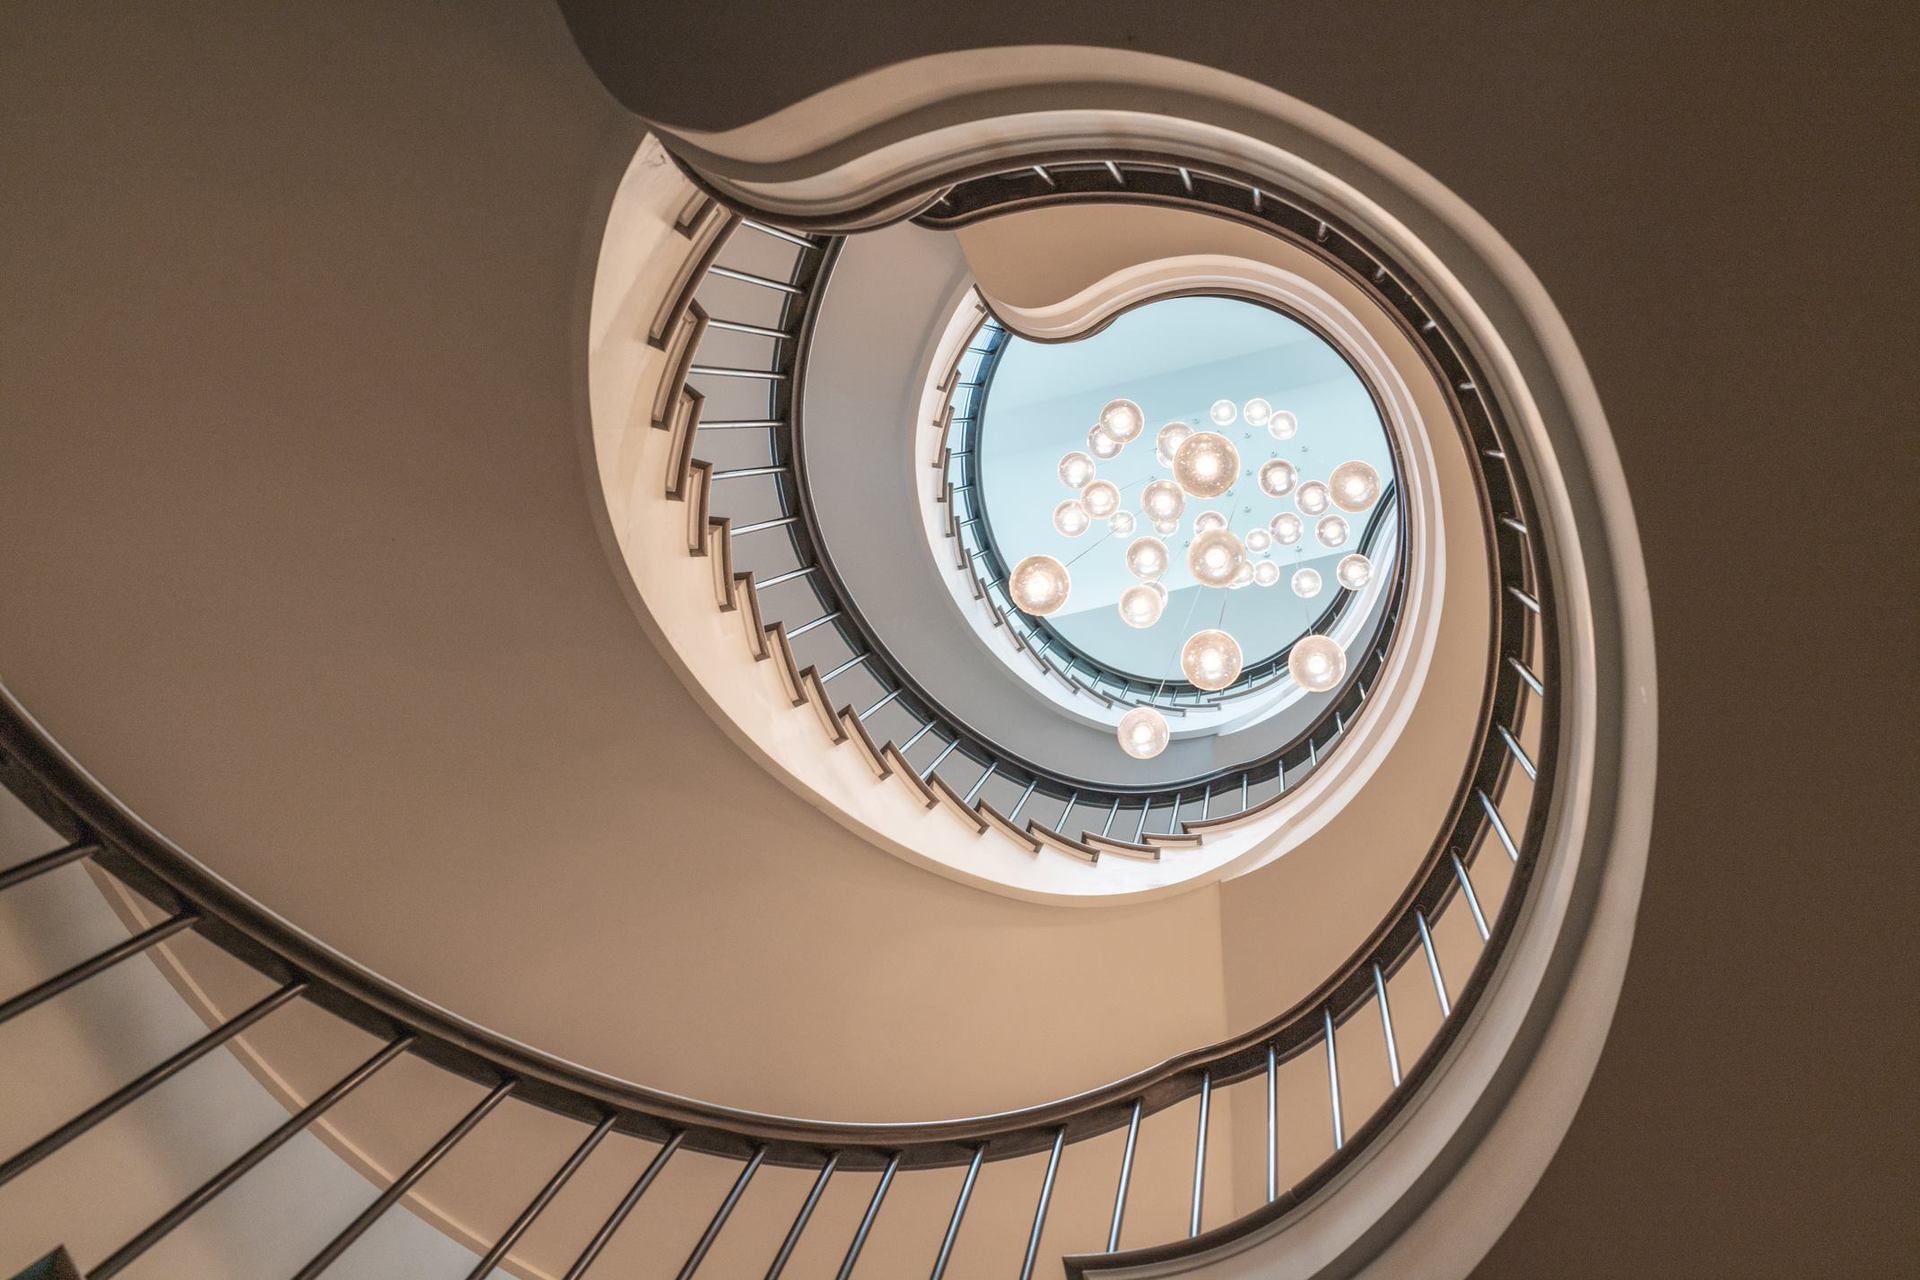 Ground floor view of two luxury spiral staircases in new build development